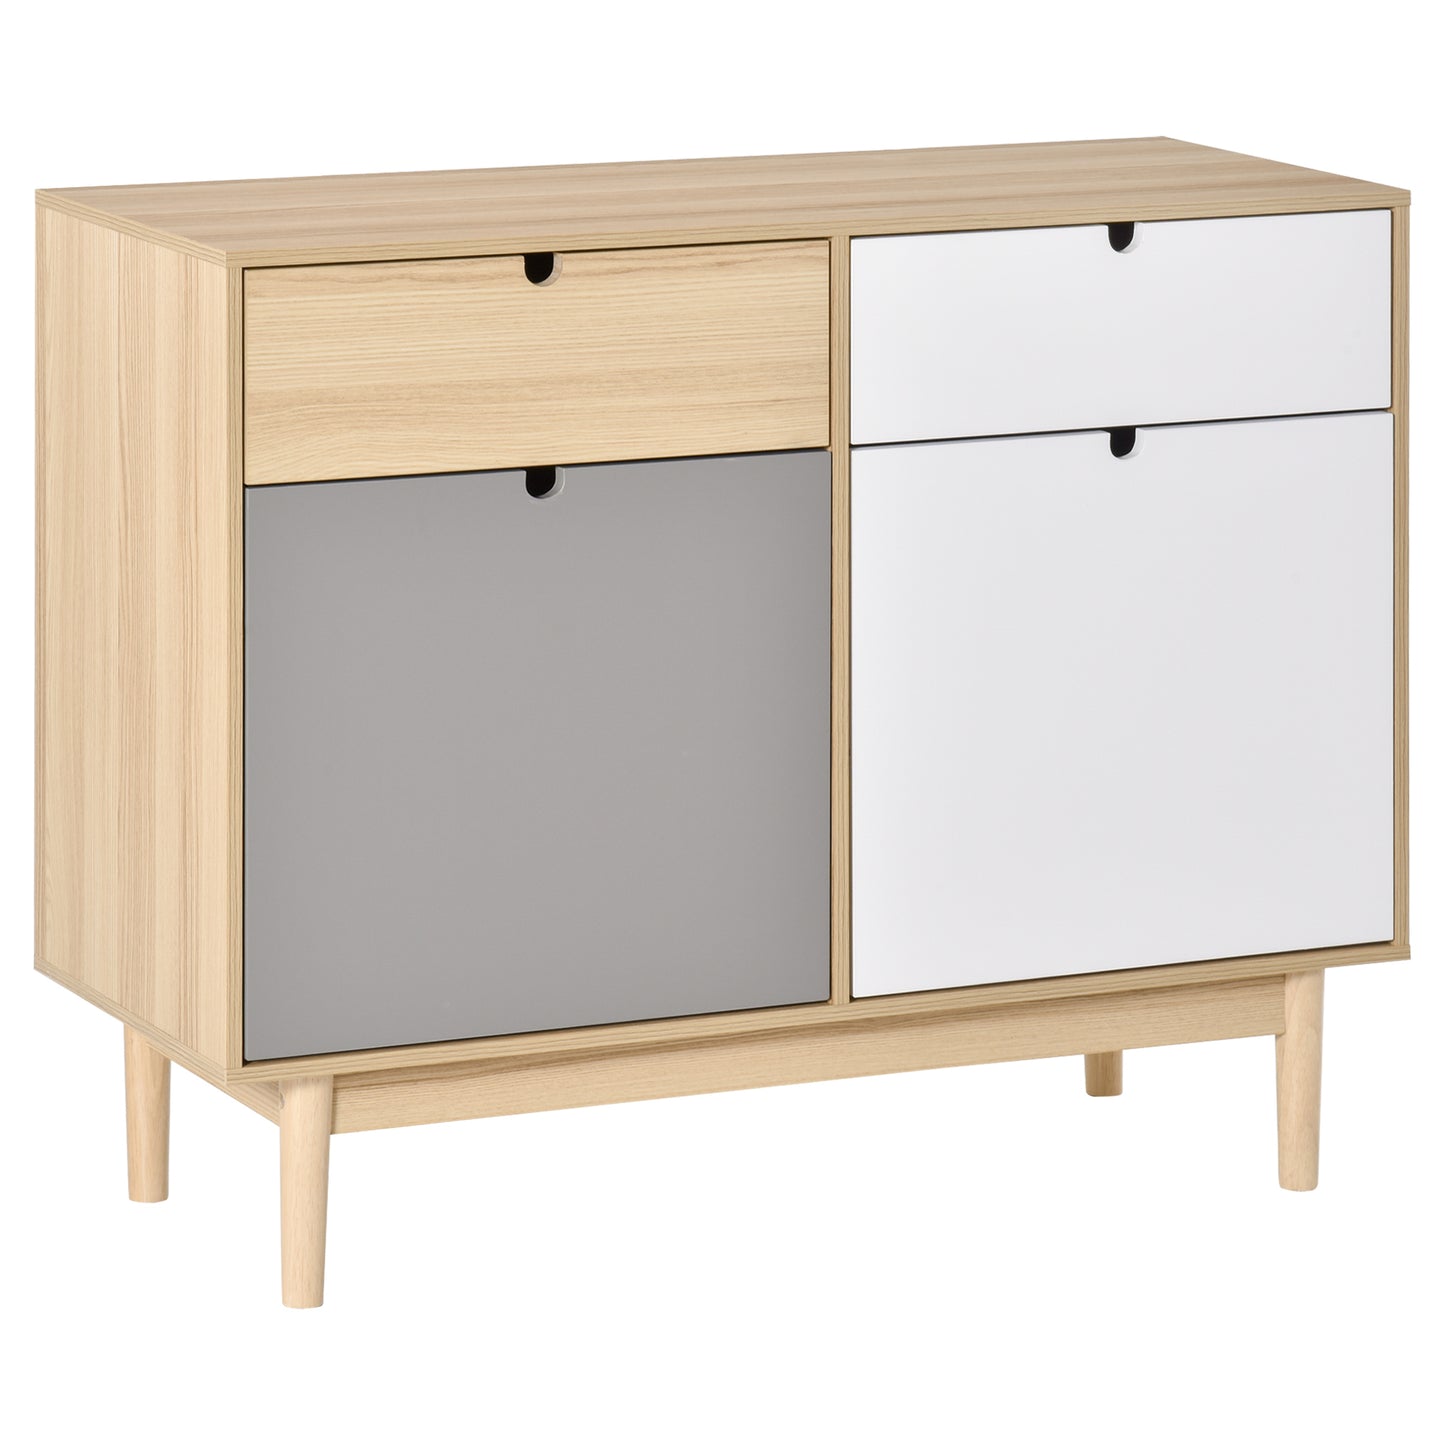 HOMCOM Sideboard Storage Cabinet Kitchen Cupboard with Drawers for Bedroom, Living Room